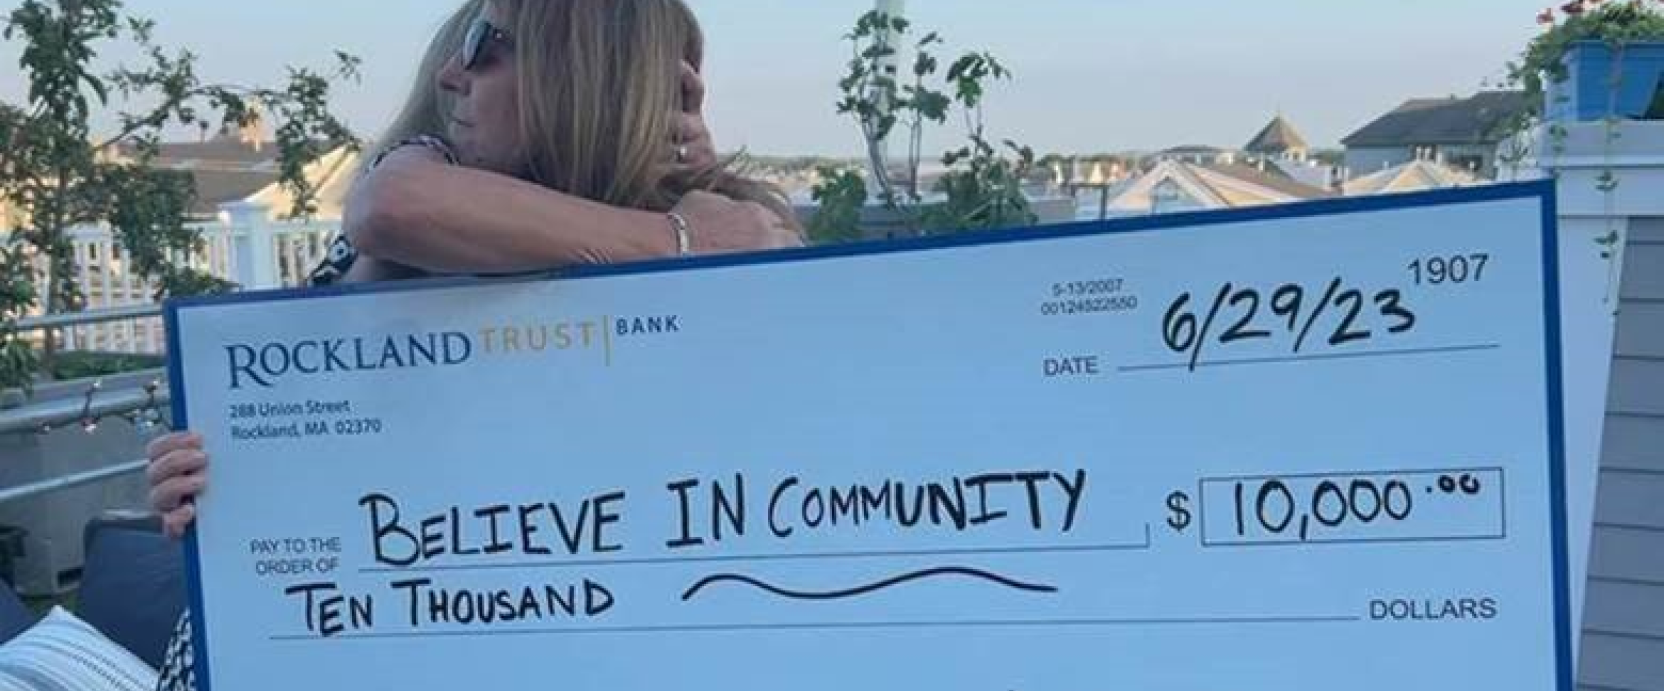 Two women from "Believe in Community" hugging to celebrate a check of 10,000 dollars from Rockland Trust's Charitable Giving Foundation.